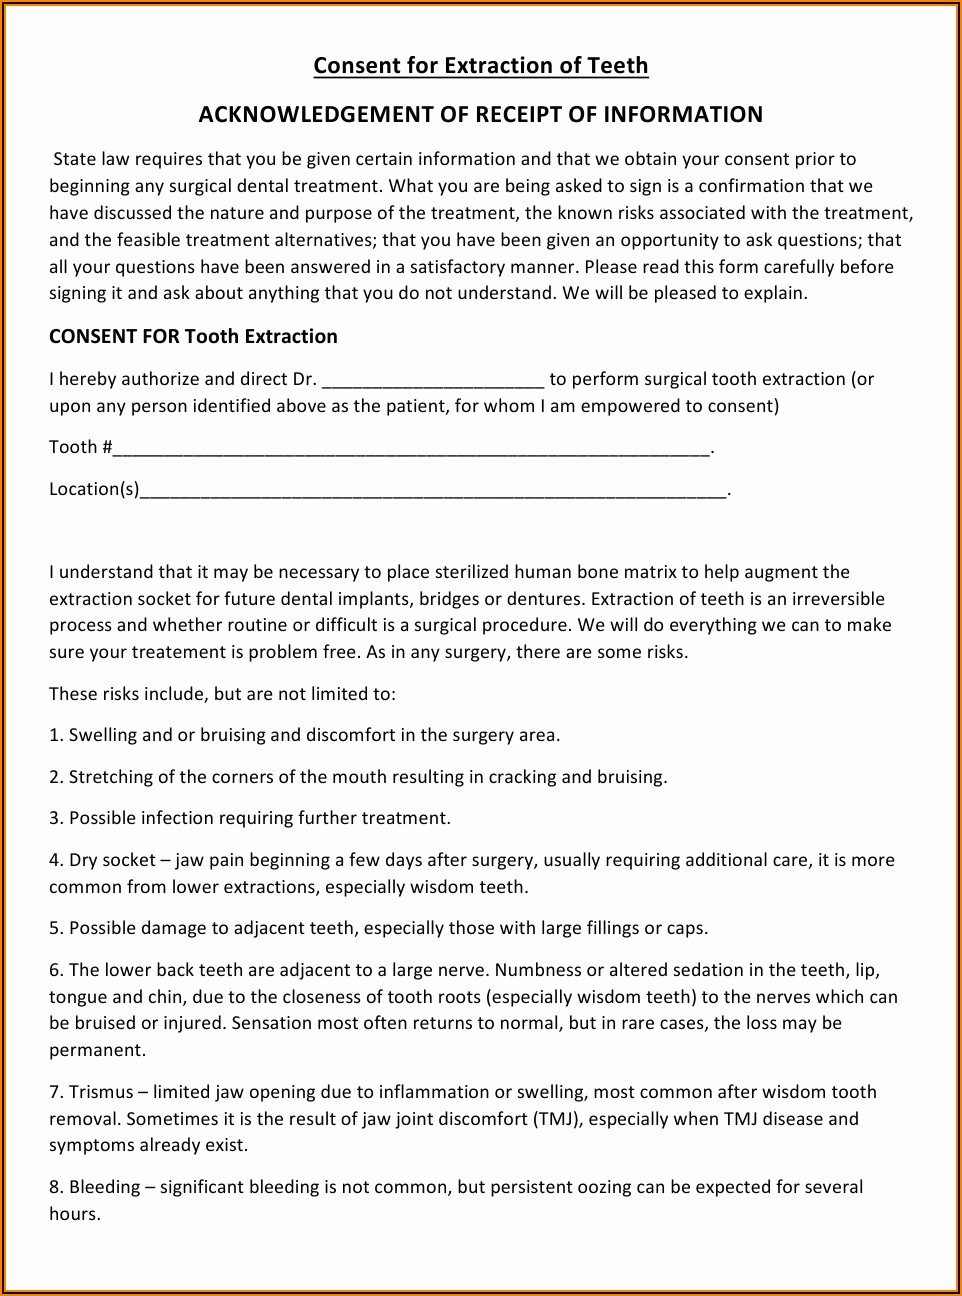 dental-implant-consent-form-template-form-resume-examples-bpv58jey1z